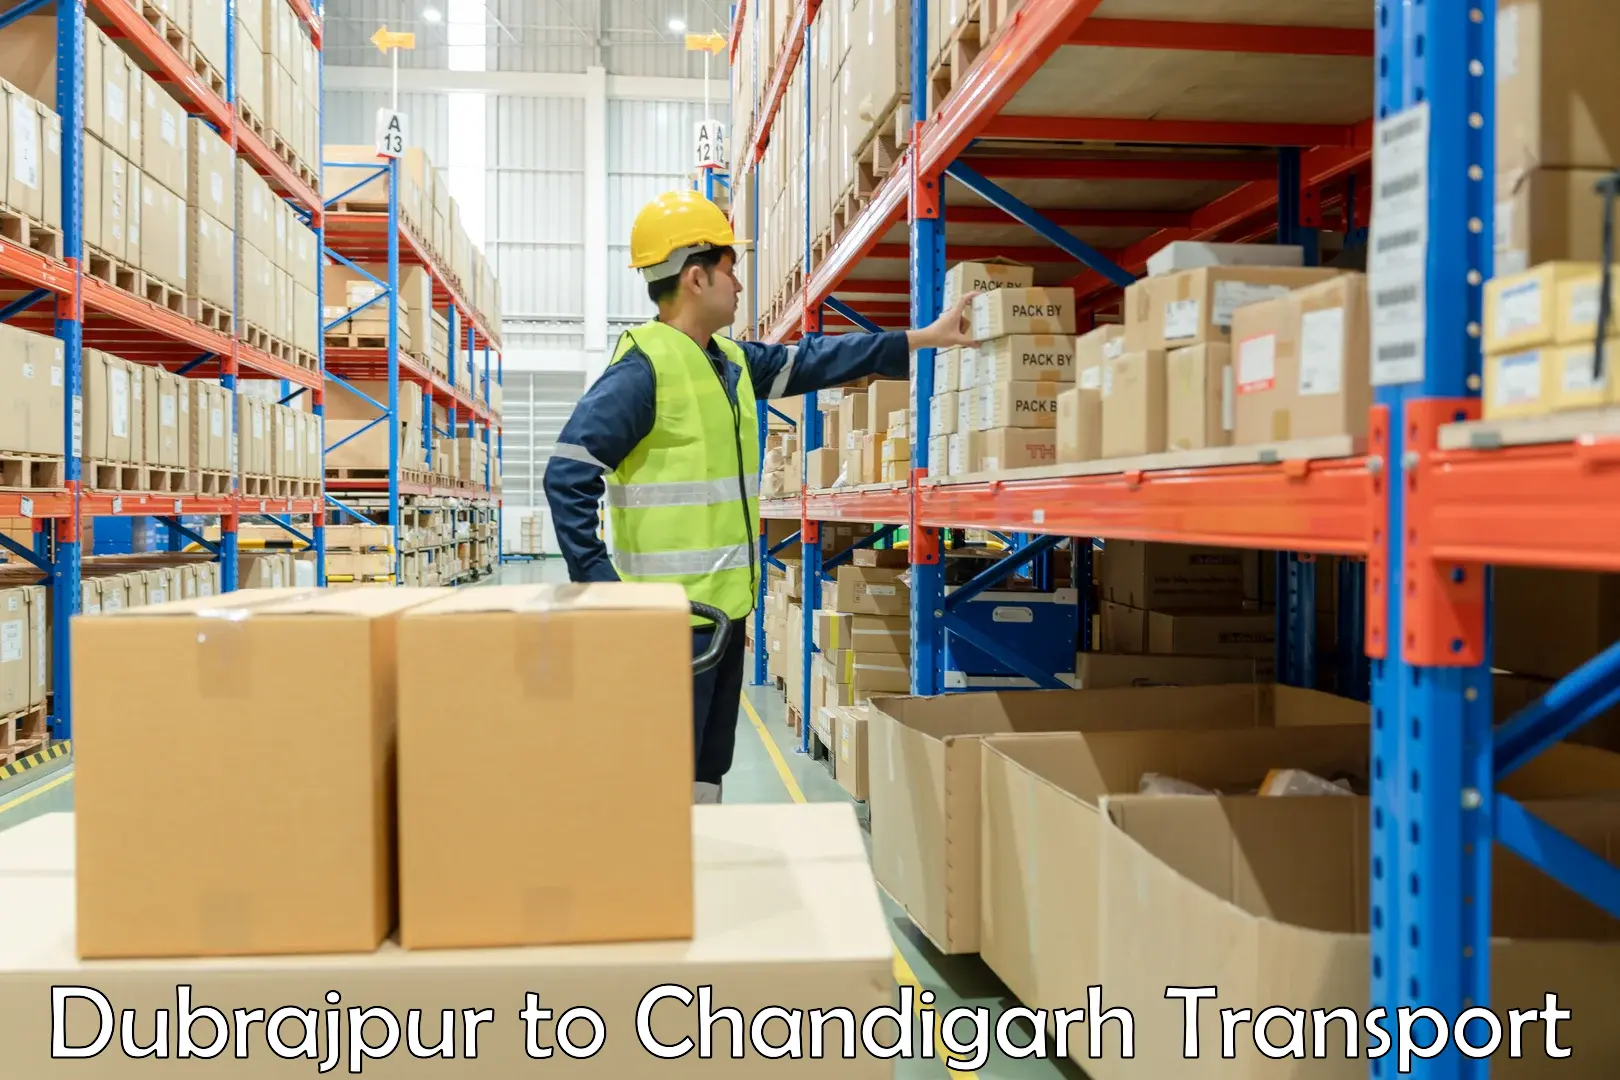 Delivery service Dubrajpur to Chandigarh